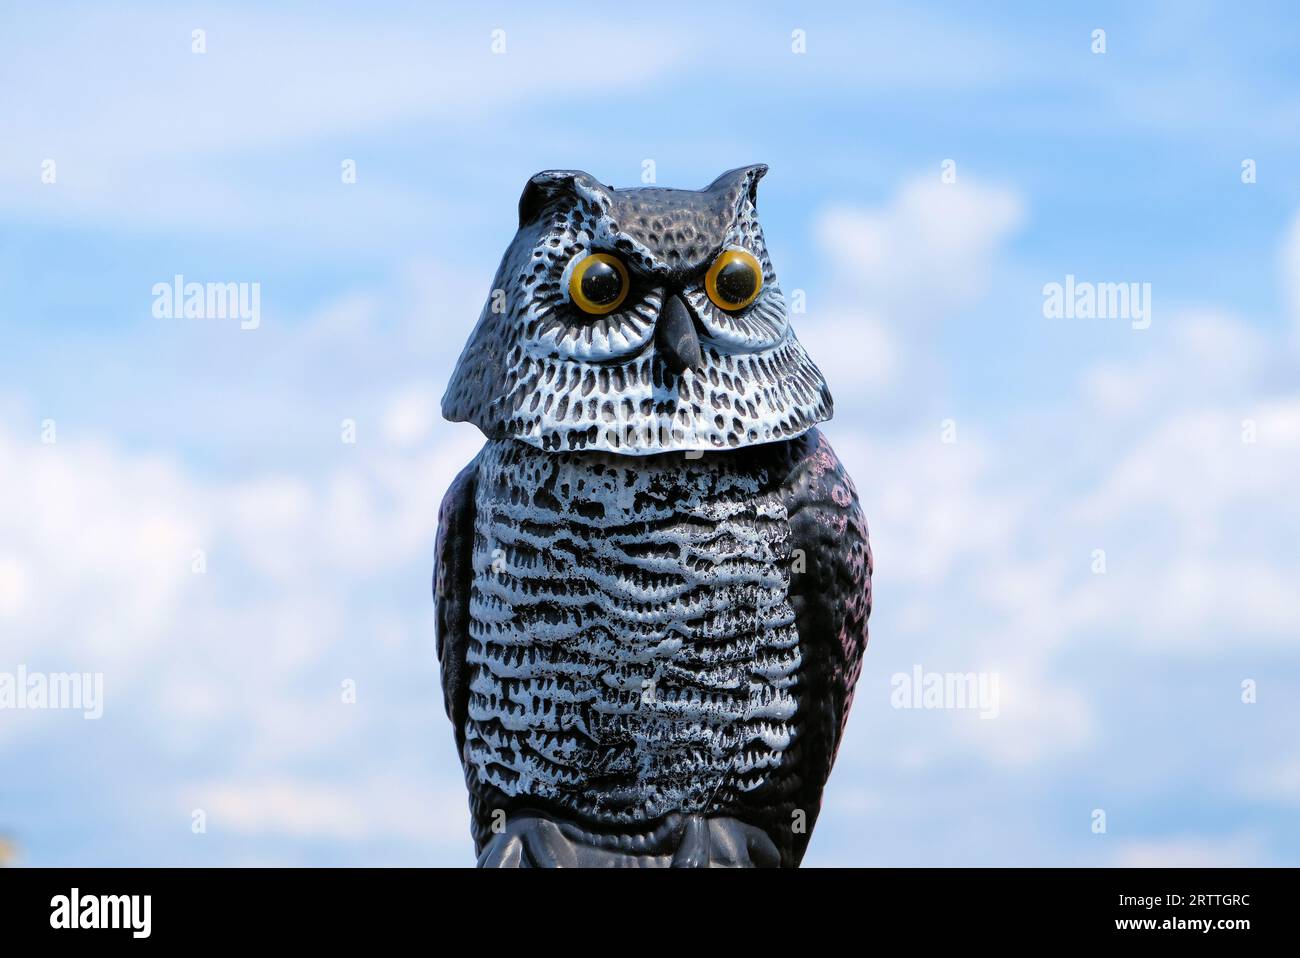 Close-up photo of decoy owl against a blue sky and white cloud background Stock Photo